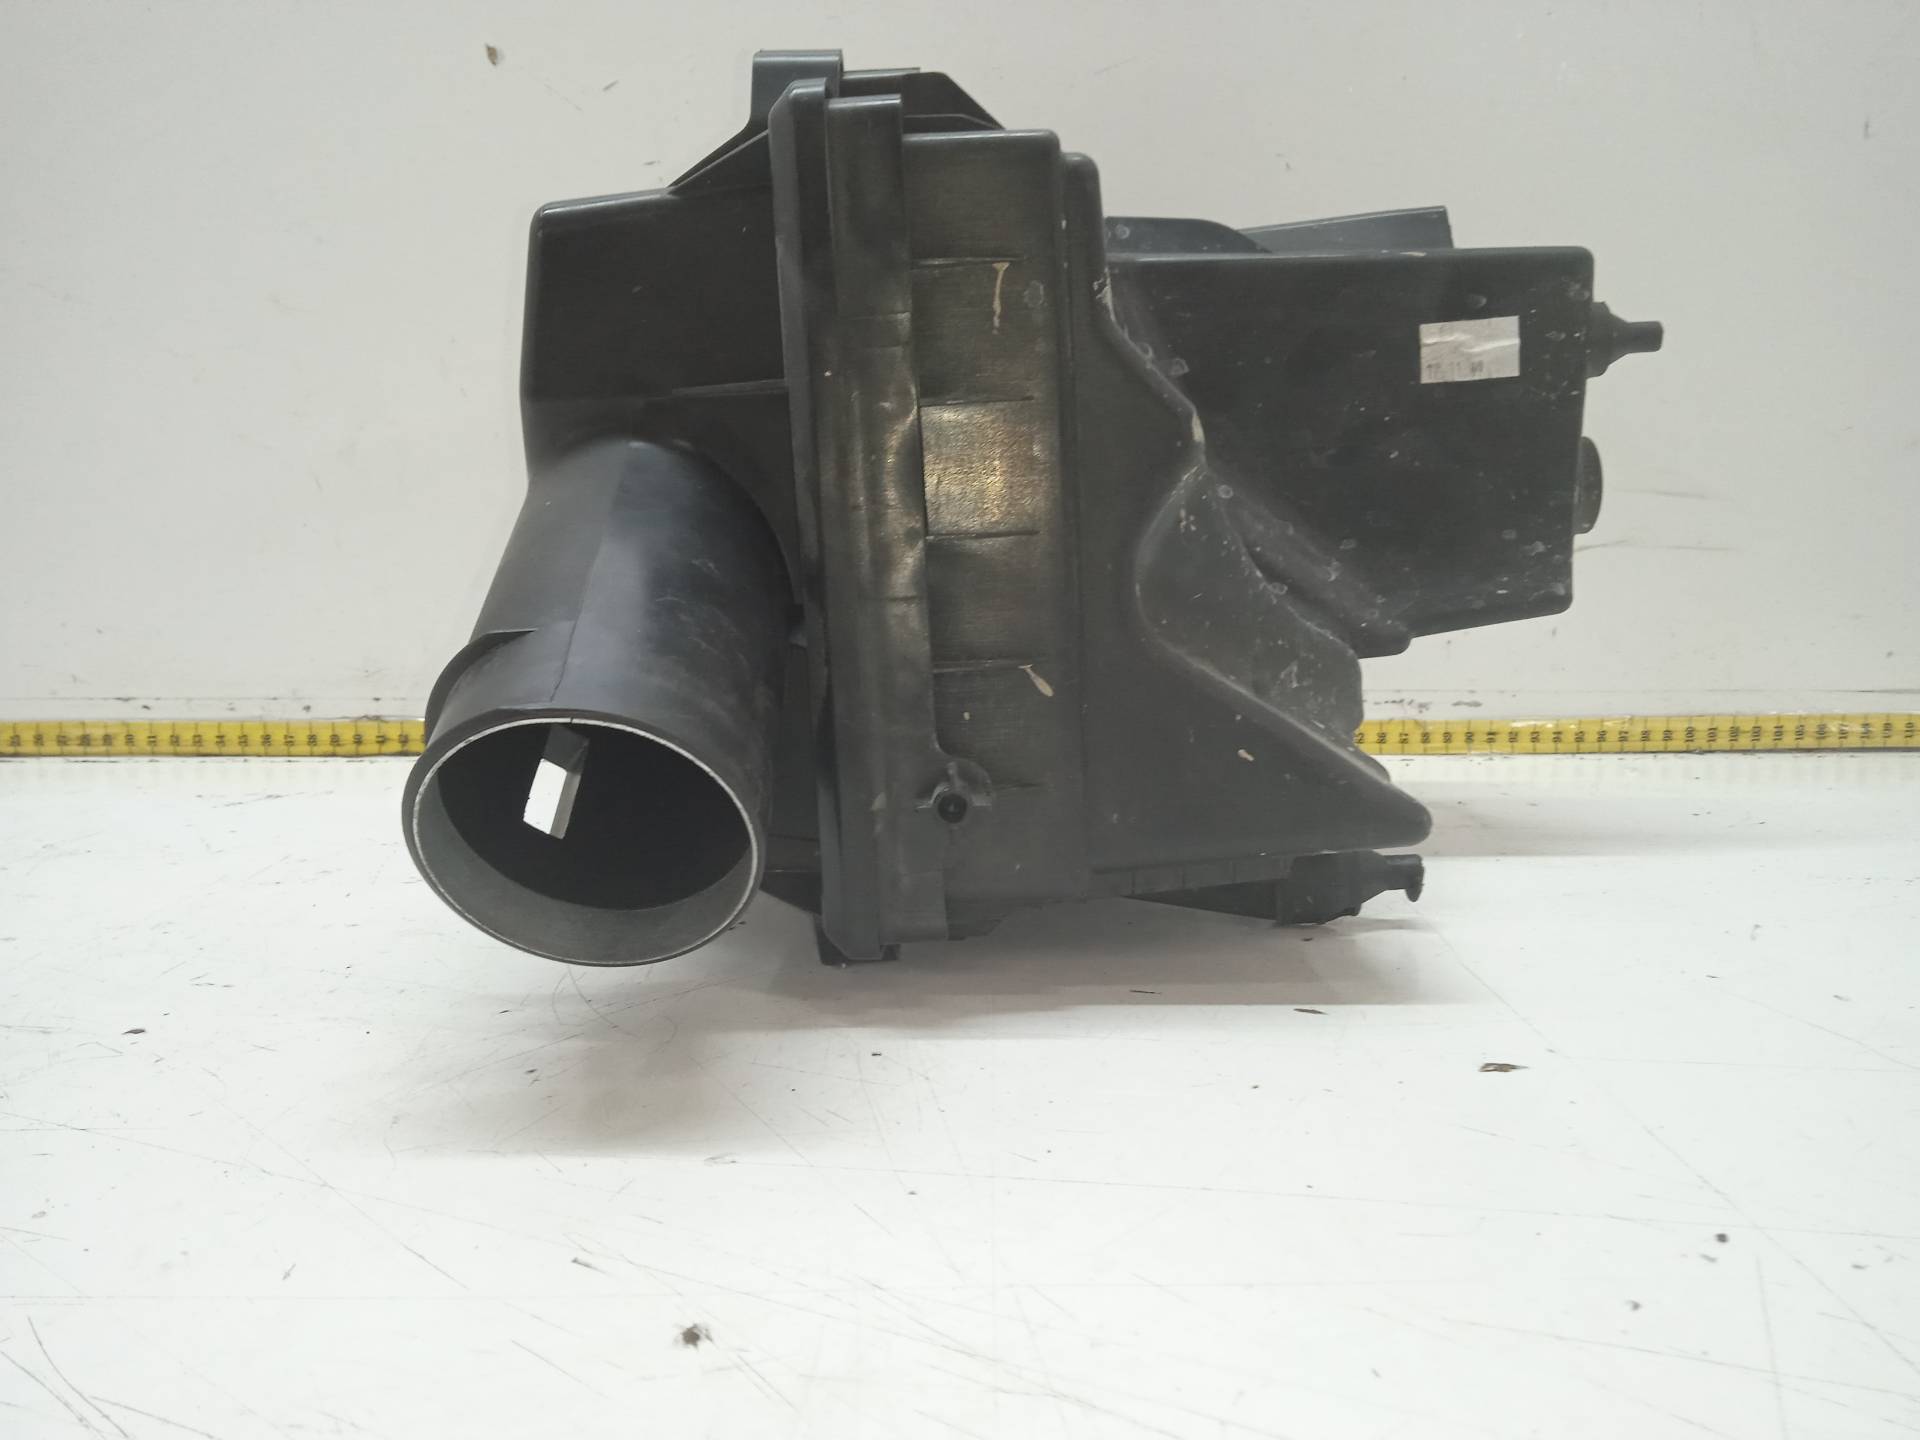 LAND ROVER Freelander 2 generation (2006-2015) Other Engine Compartment Parts 6G929600BF 24330079